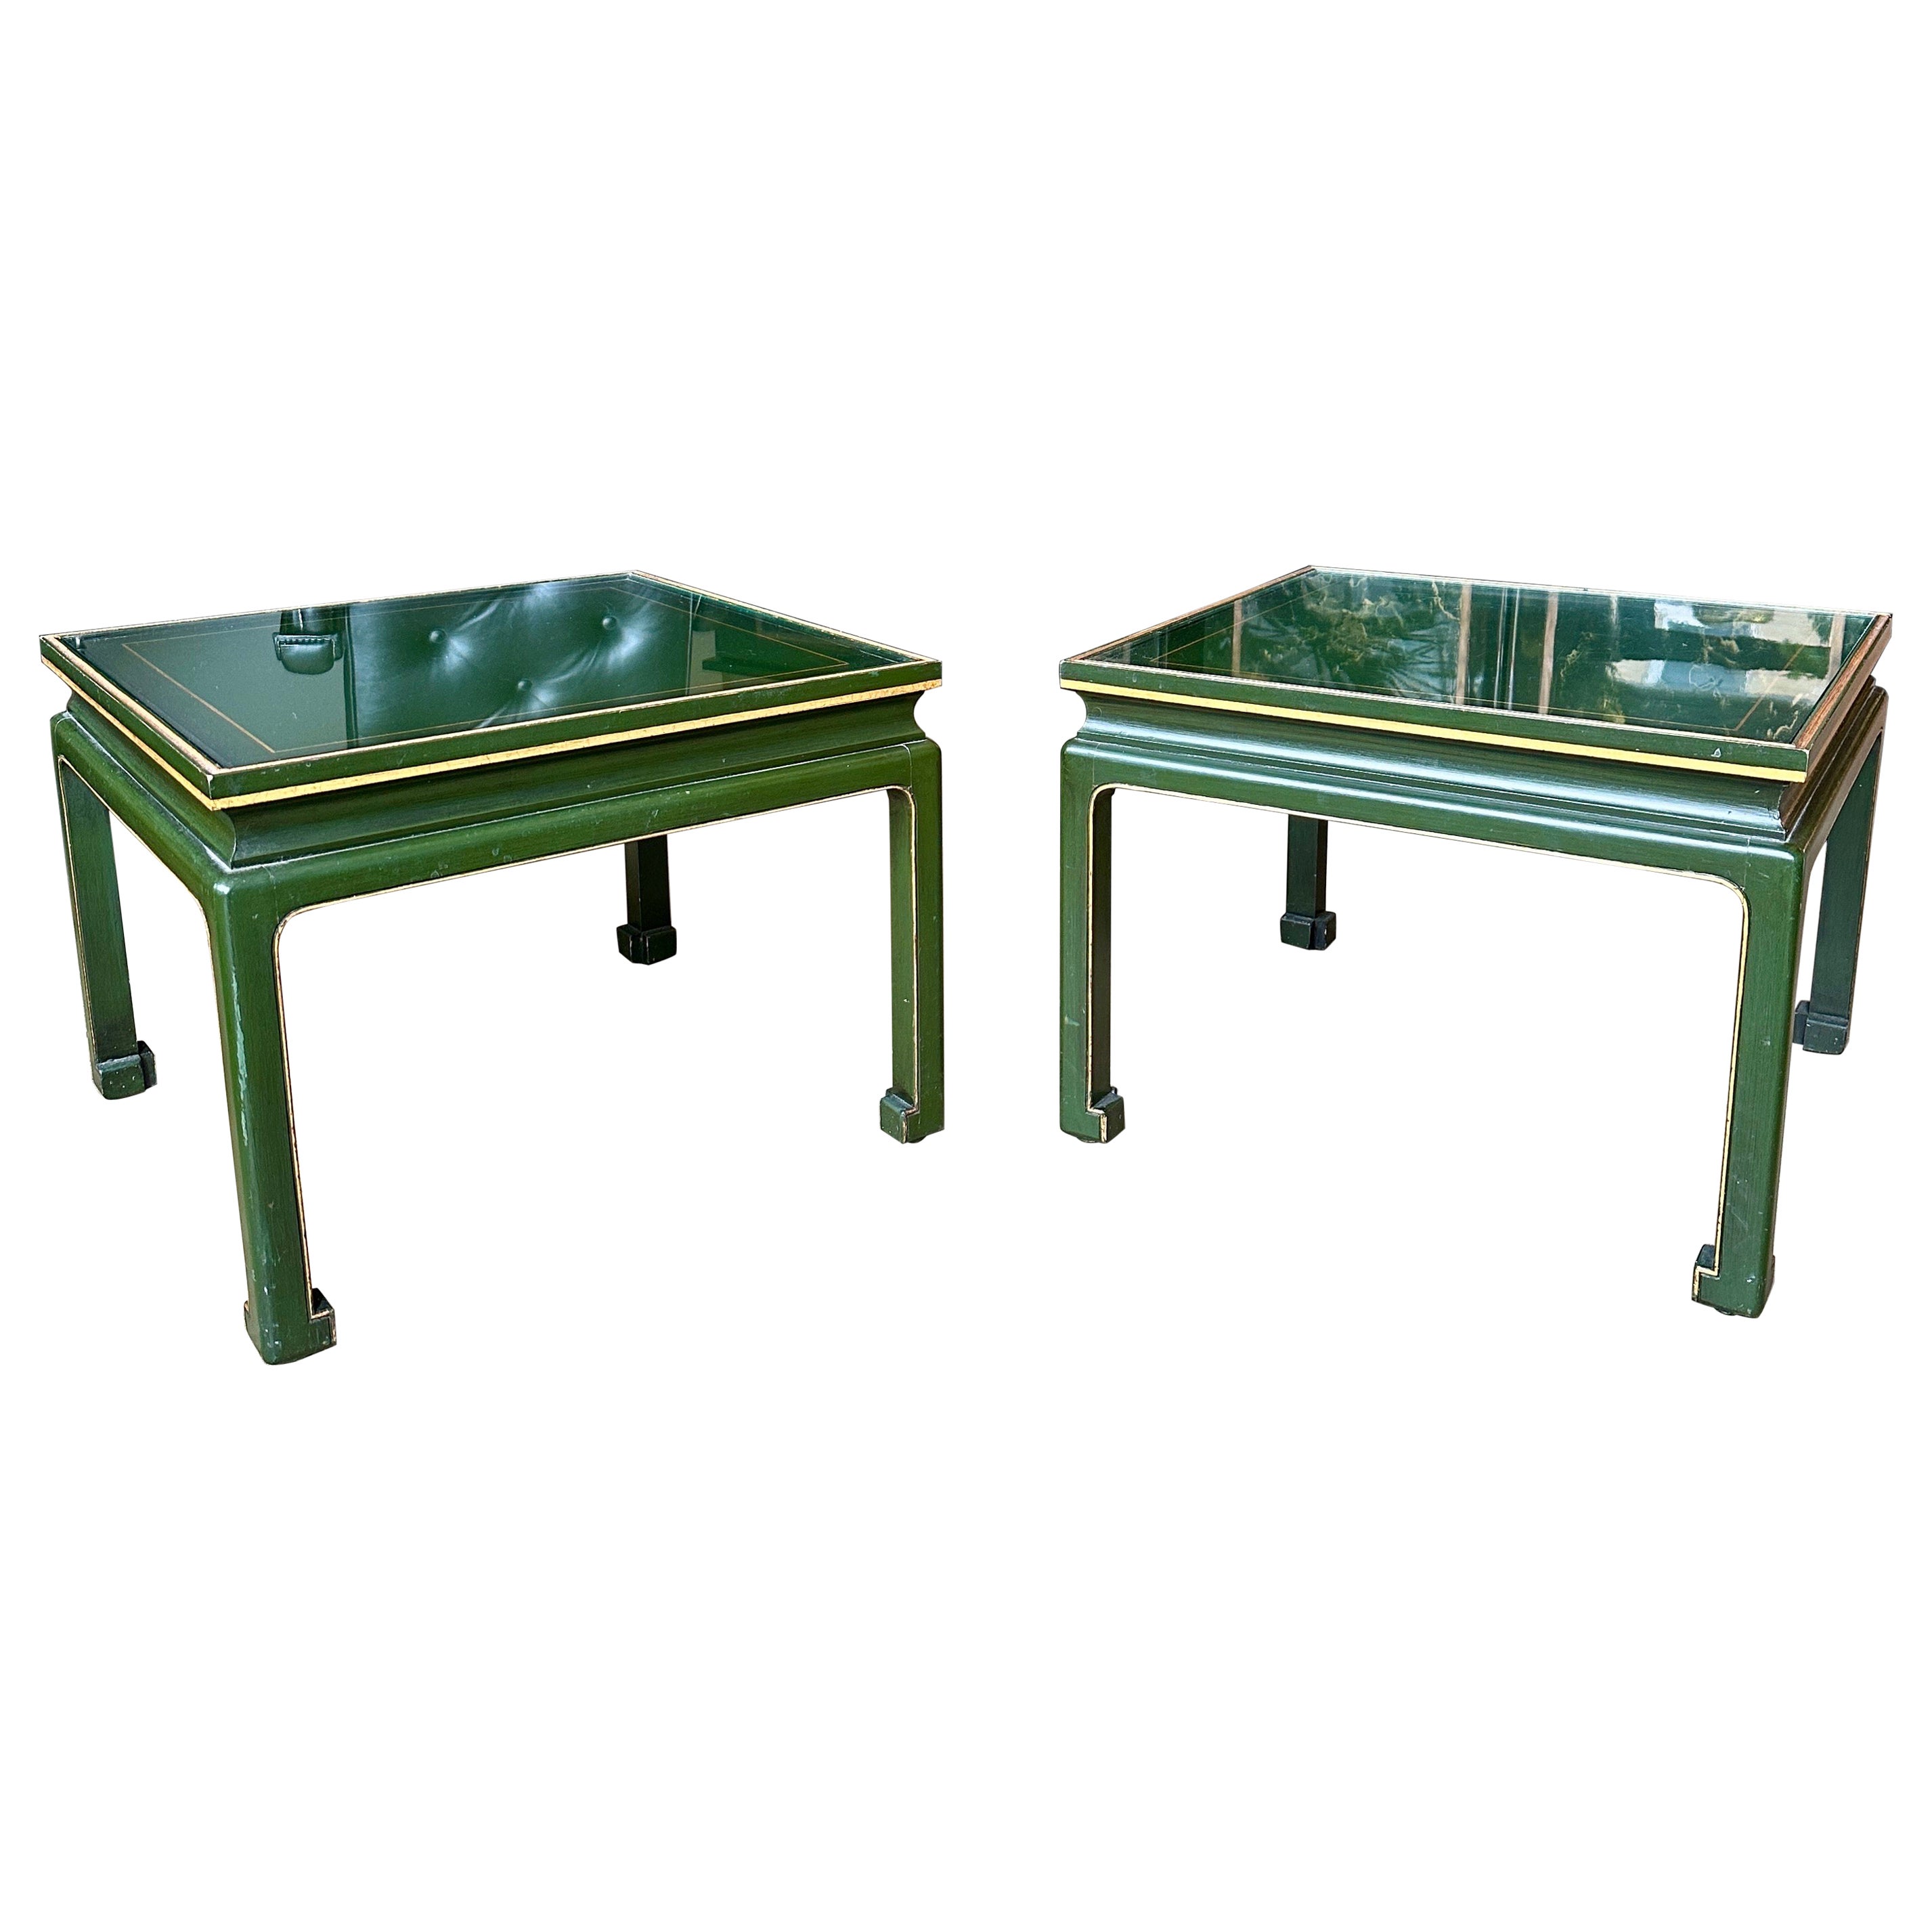 A Pair Of French Green And Gold Gilt Chinese Style Side Tables